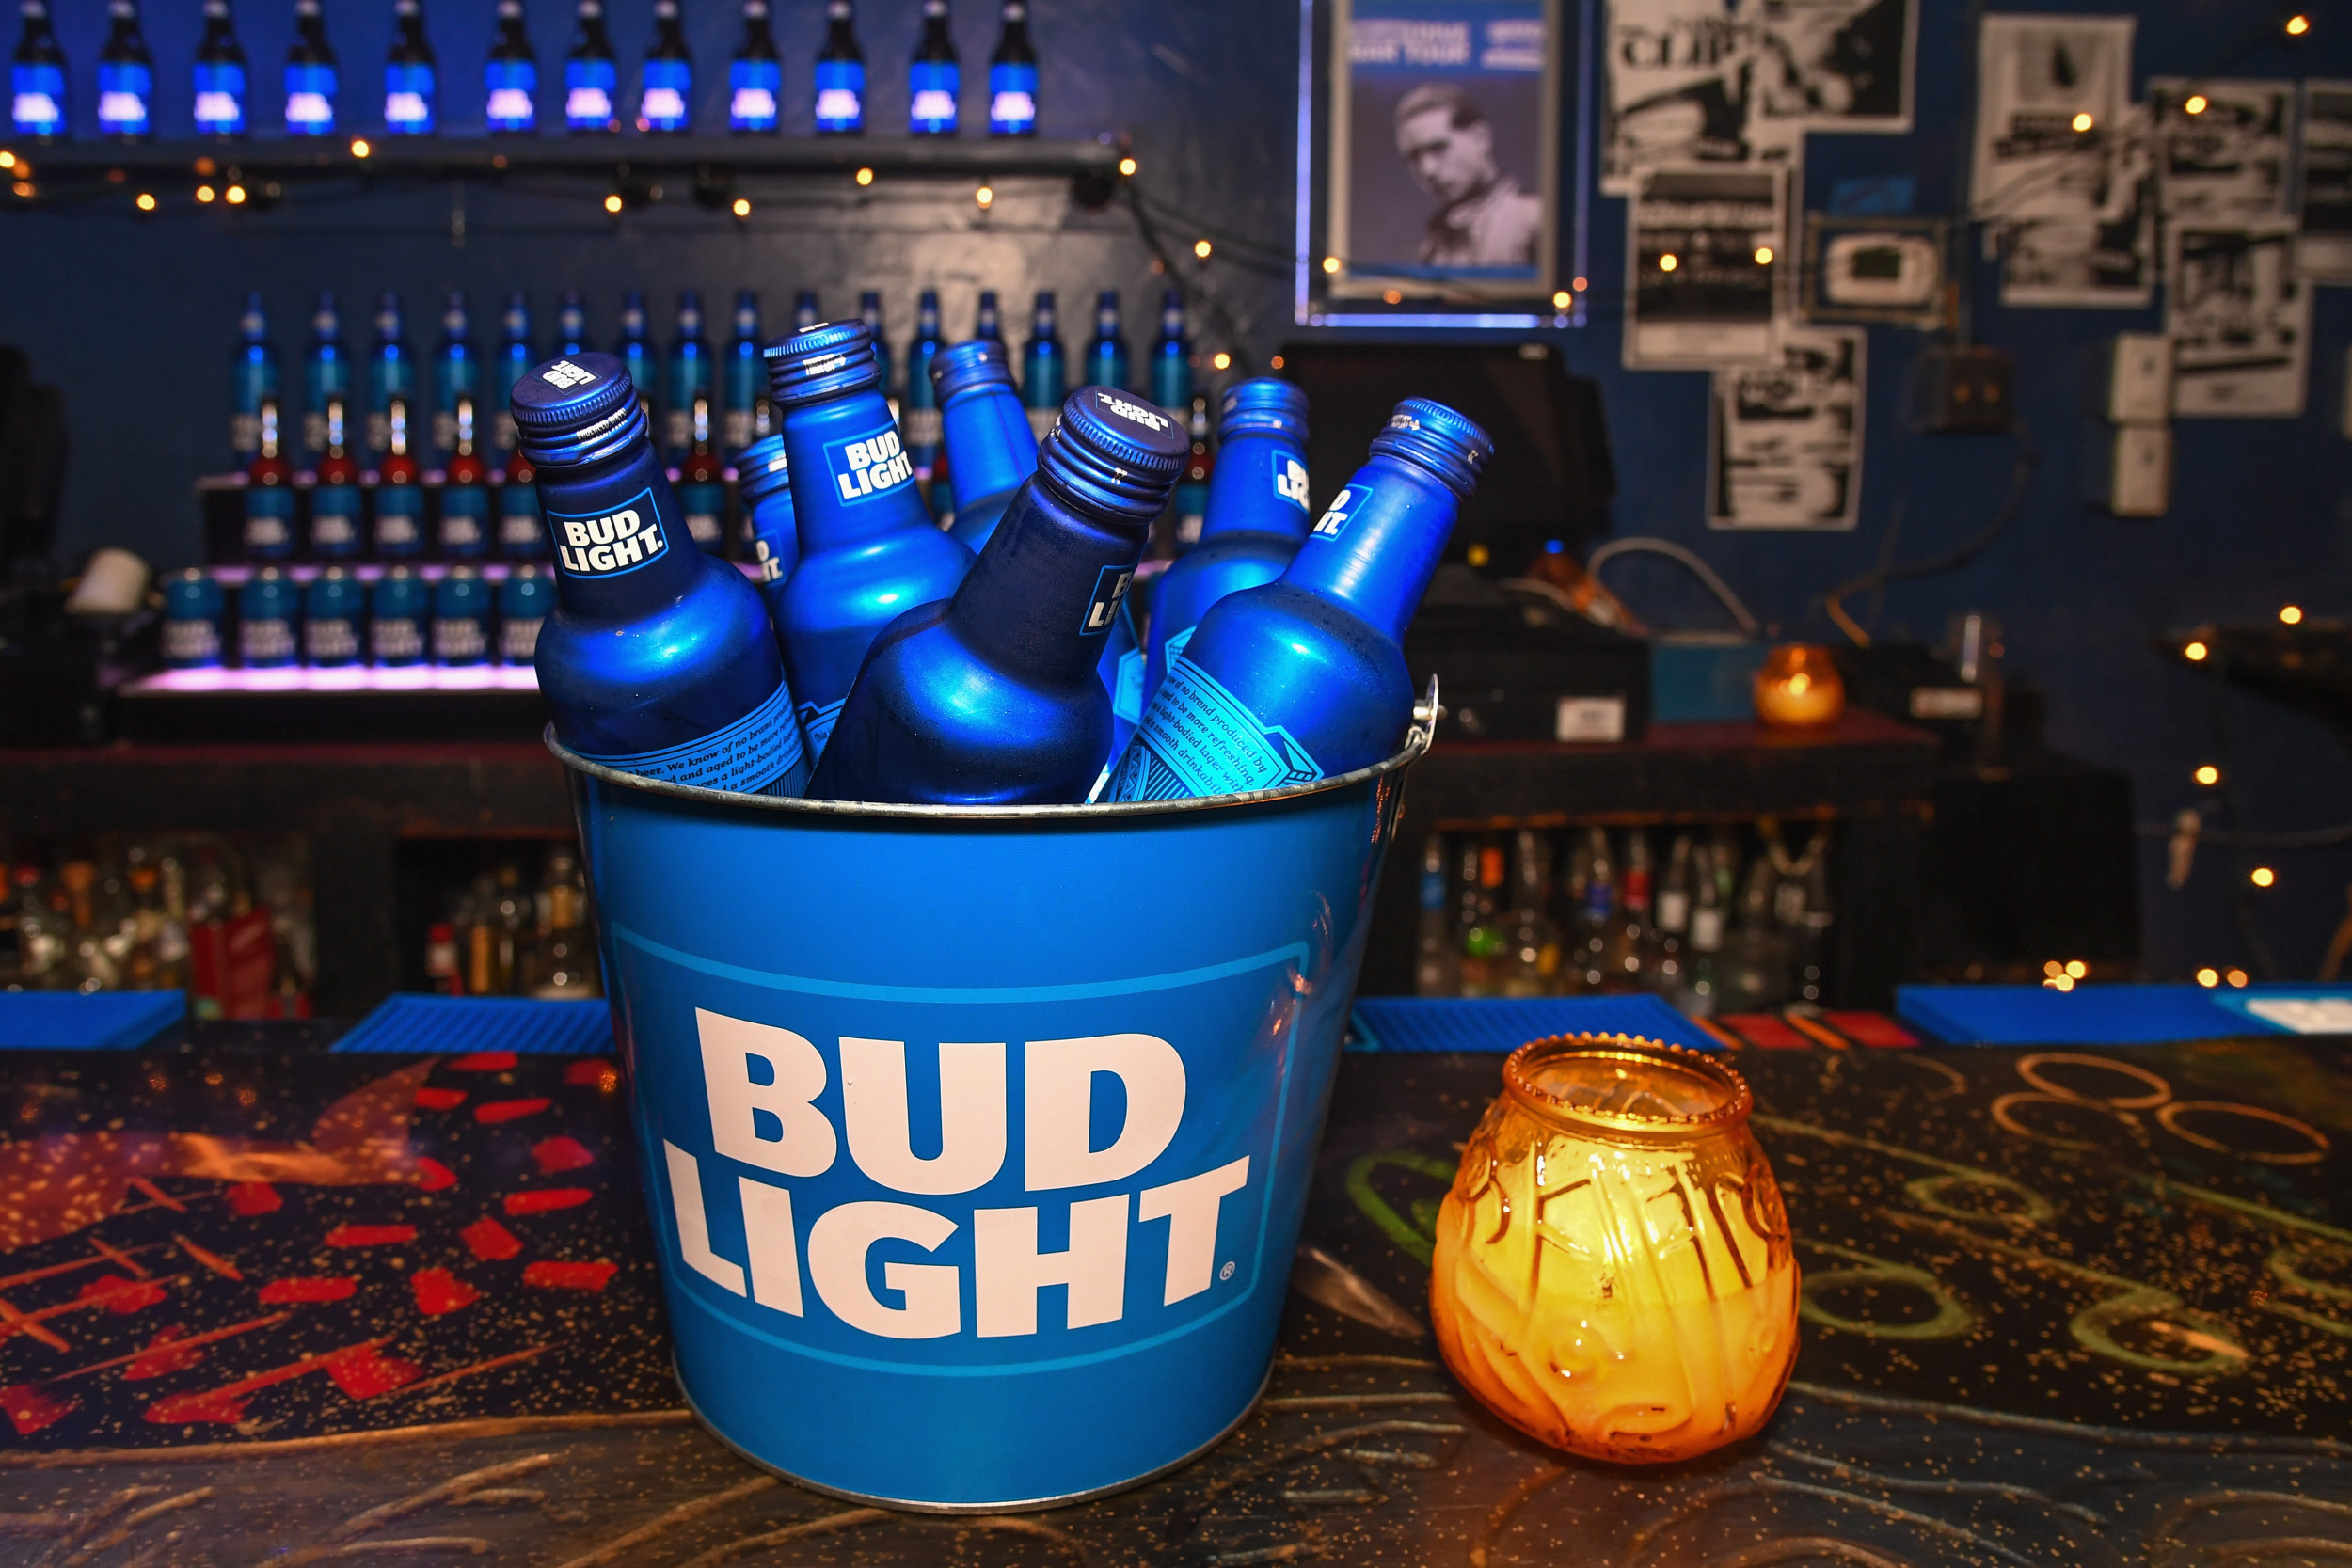 Bud Light Sales Chart Reveals How Much Brand Has Suffered Since Boycott